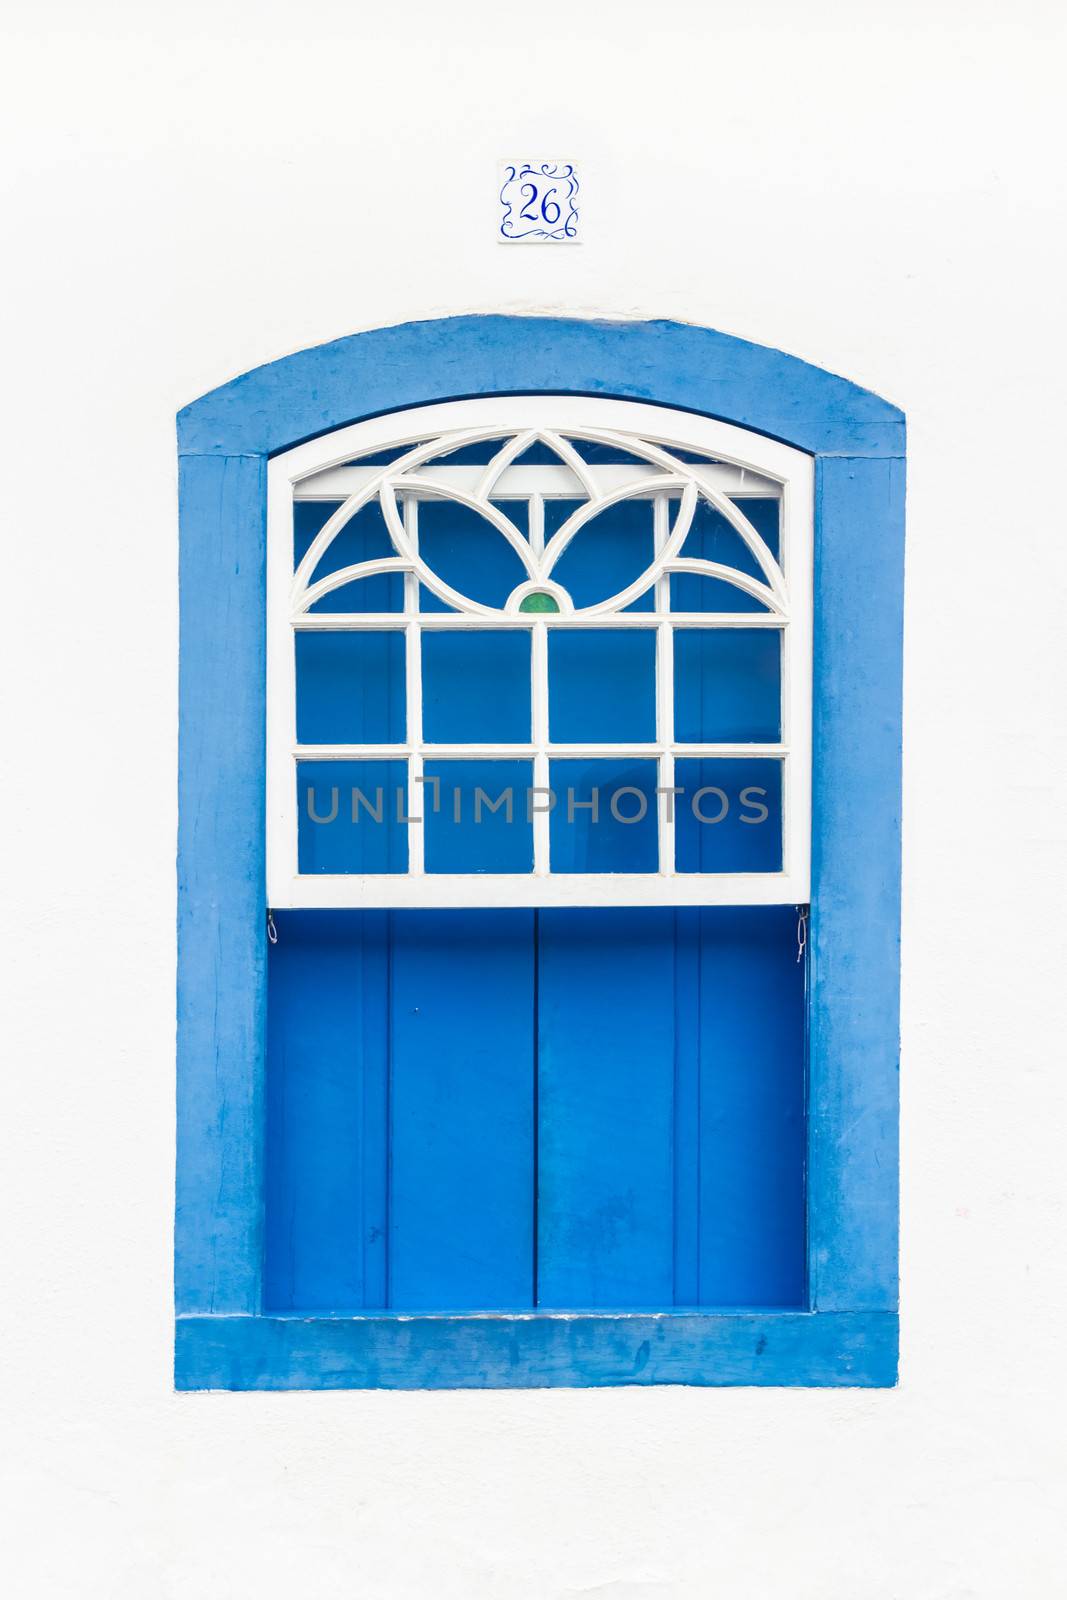 Decorative, colonial, blue, vintage, window on a white wall in Paraty (or Parati), Brazil.